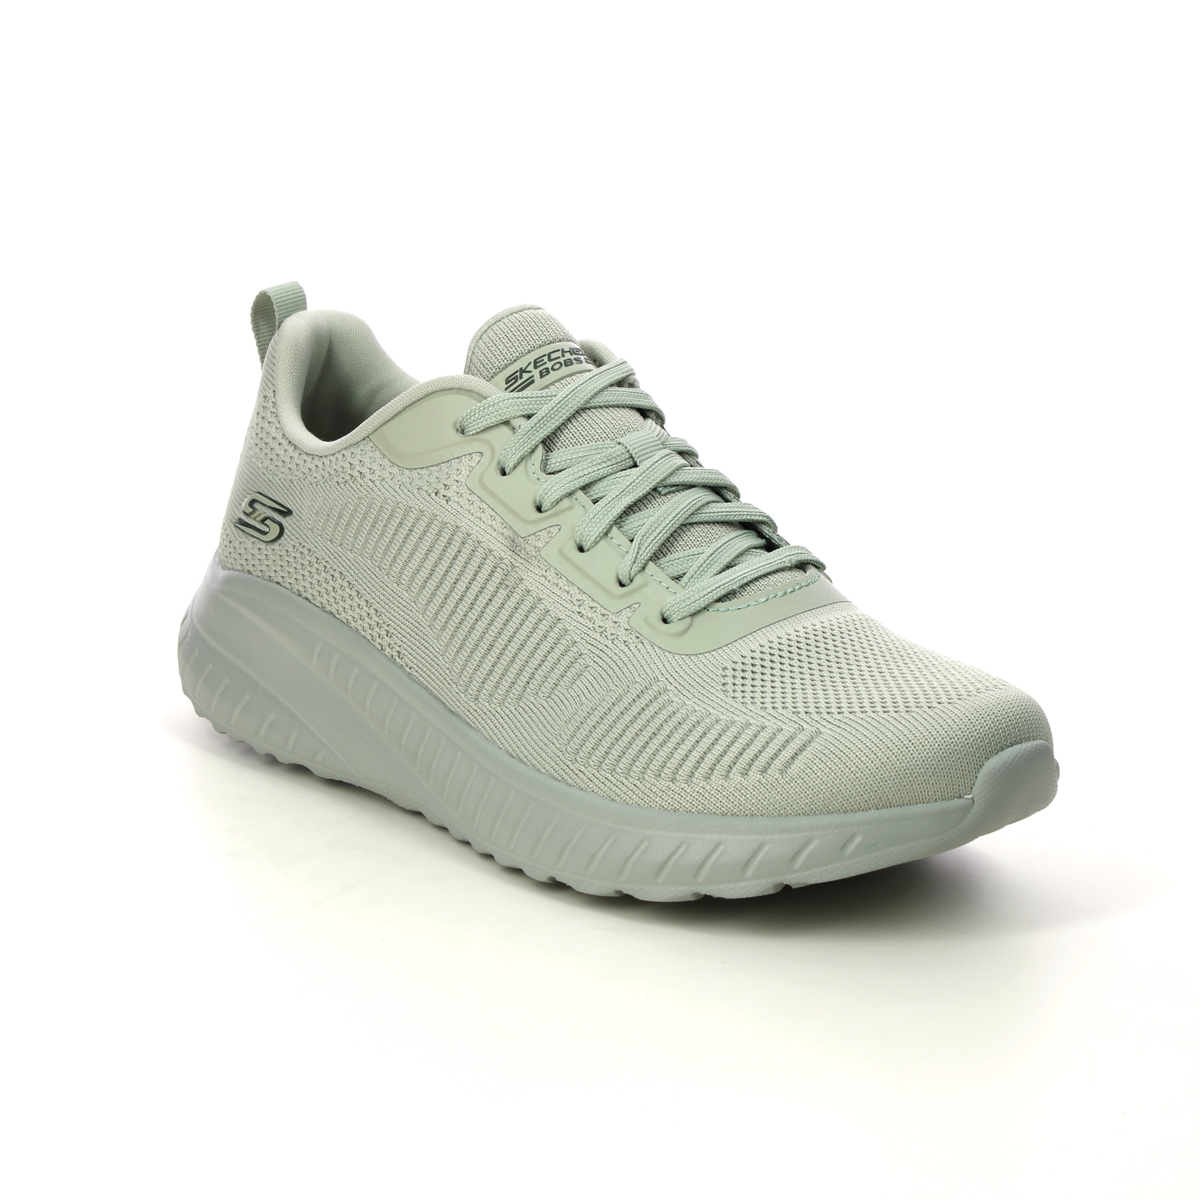 Skechers Bobs Squad Chaos SAGE Sage green Womens trainers 117209 in a Plain Textile in Size 5